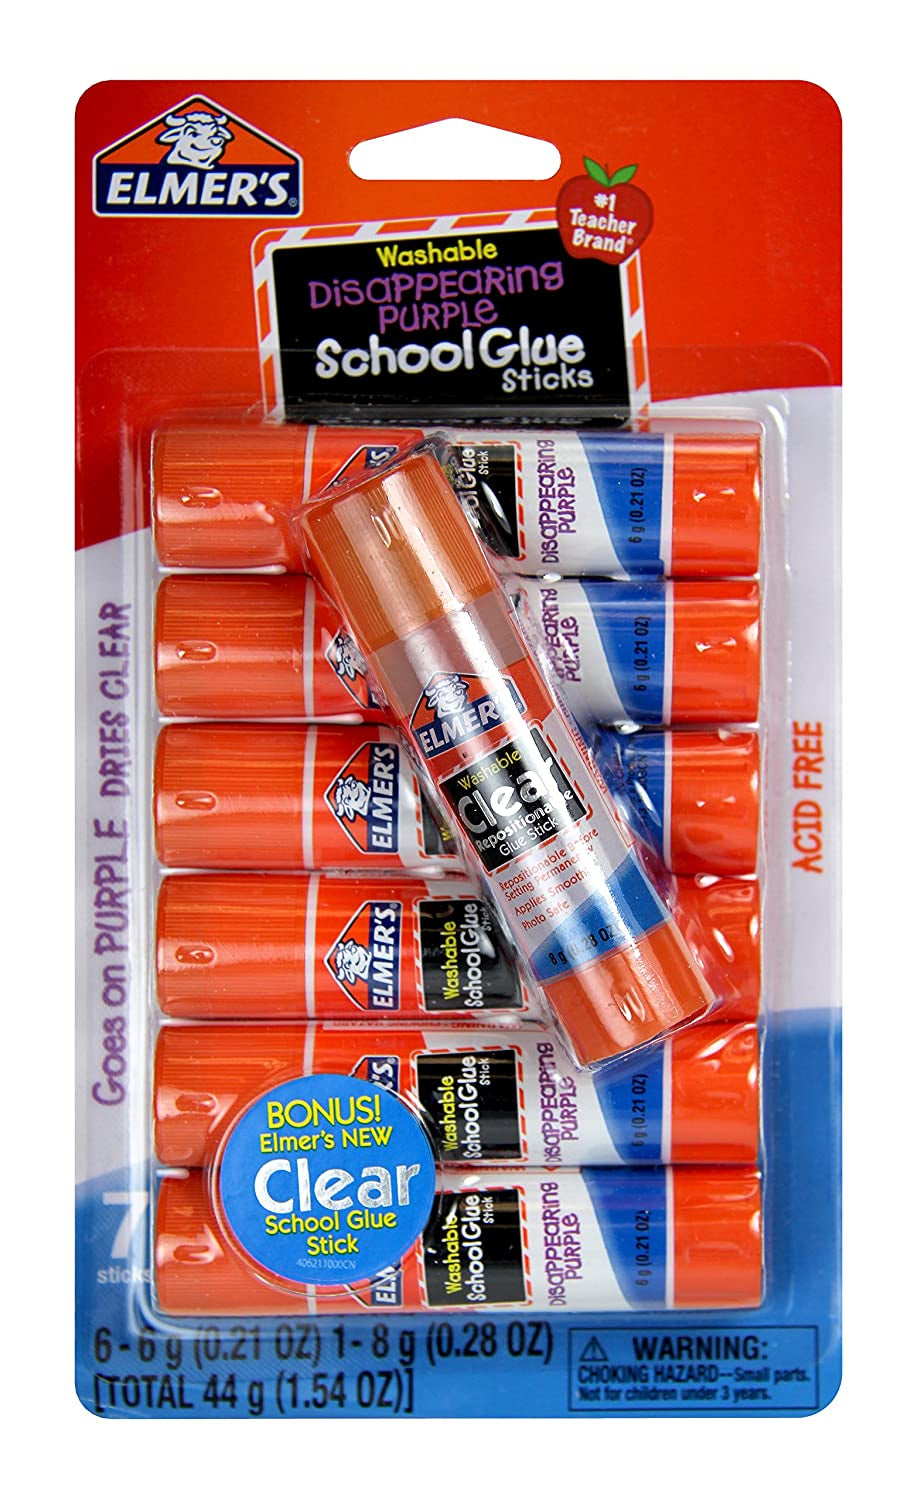 Disappearing Purple School Glue Sticks, Washable, 6 Grams, 12 Count